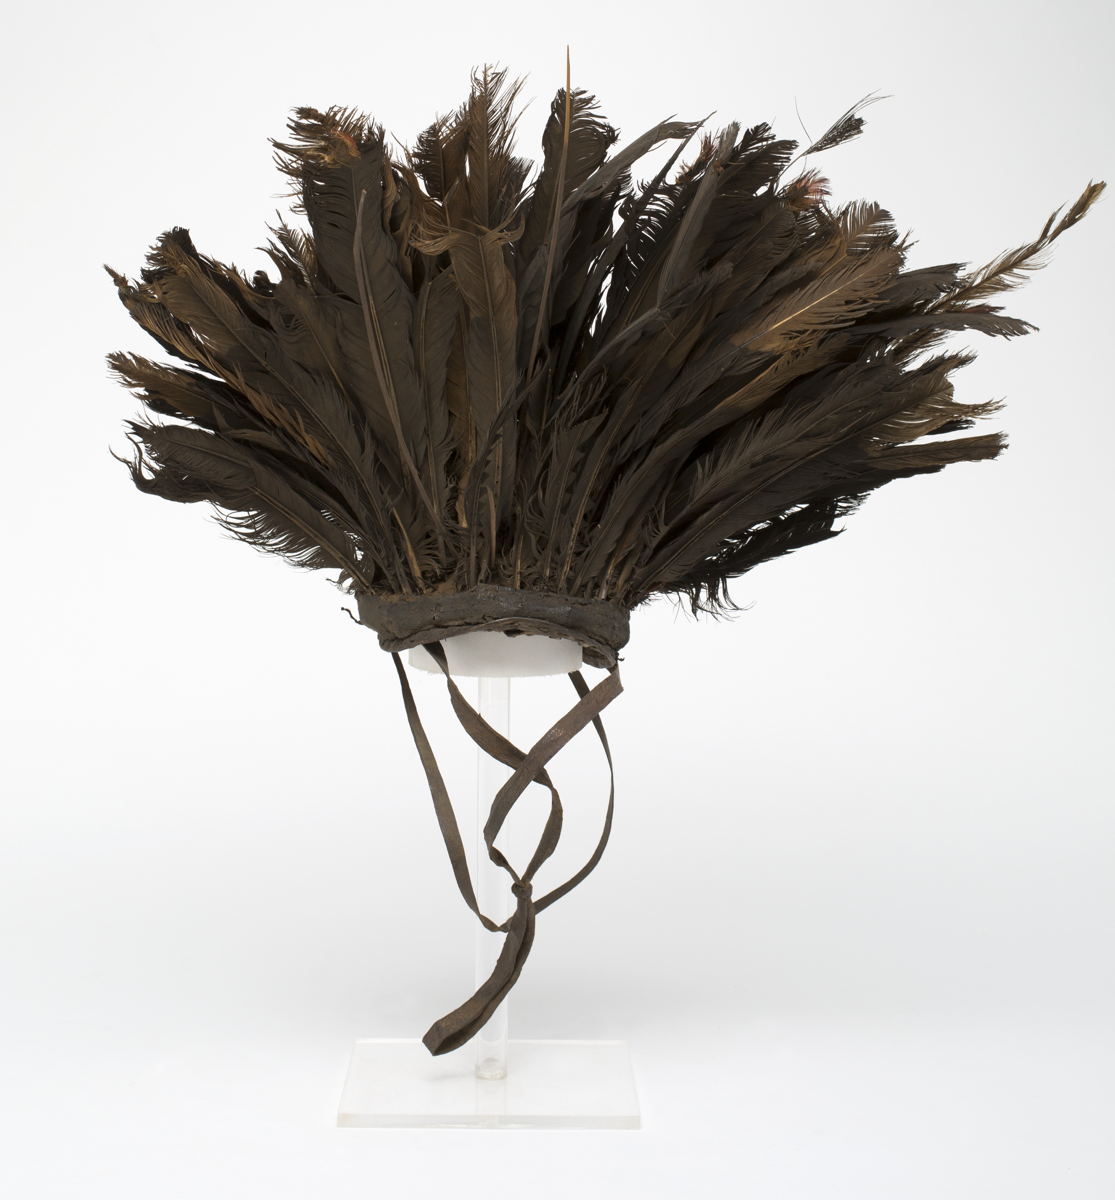 hat with long brown feathers mounted on a leather and cloth cap. Two chin straps attached to the edges.